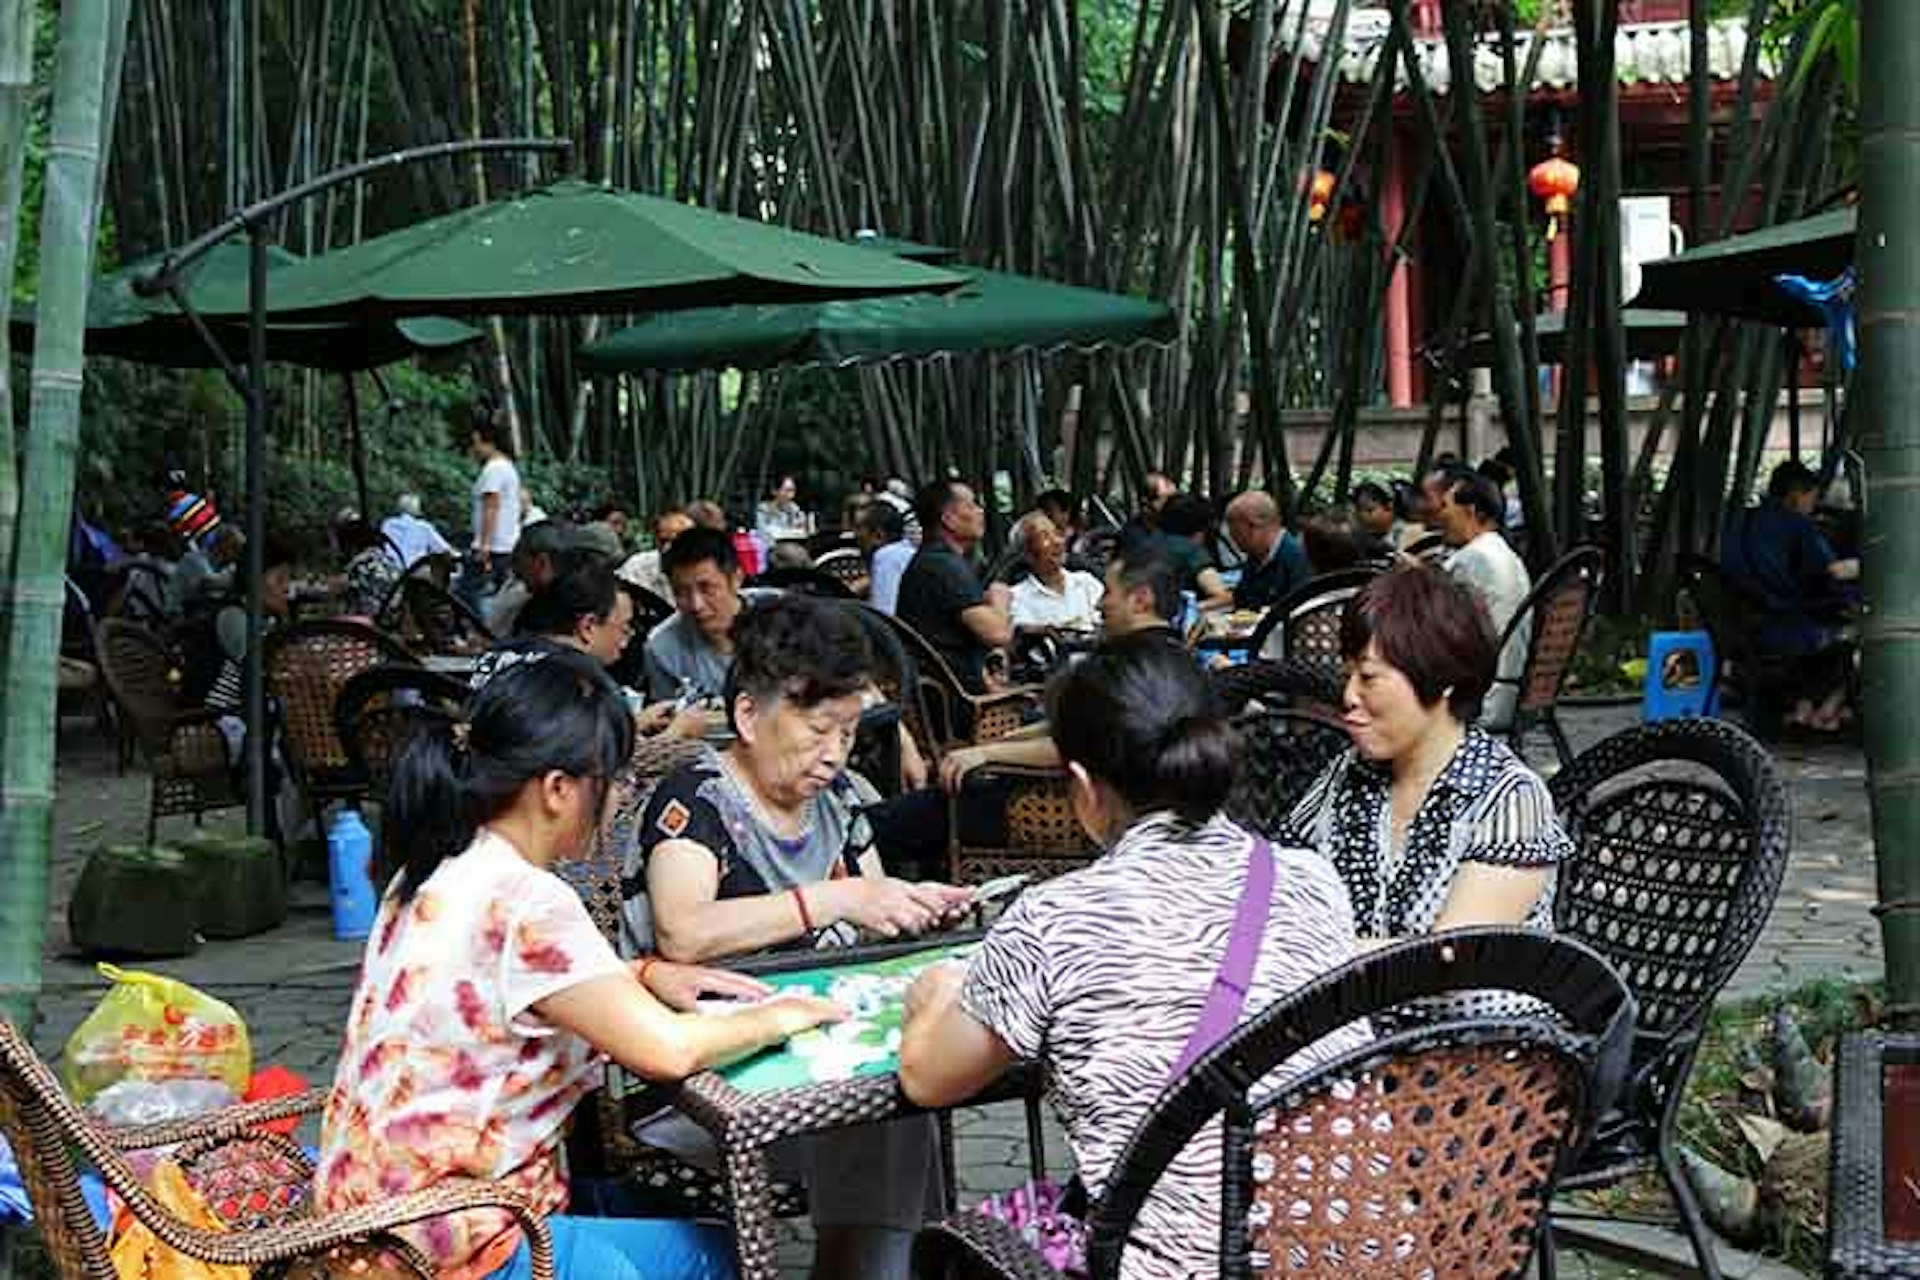 Tea drinkers in Chengdu's Cultural Park. Image by Qin Xie / Lonely Planet